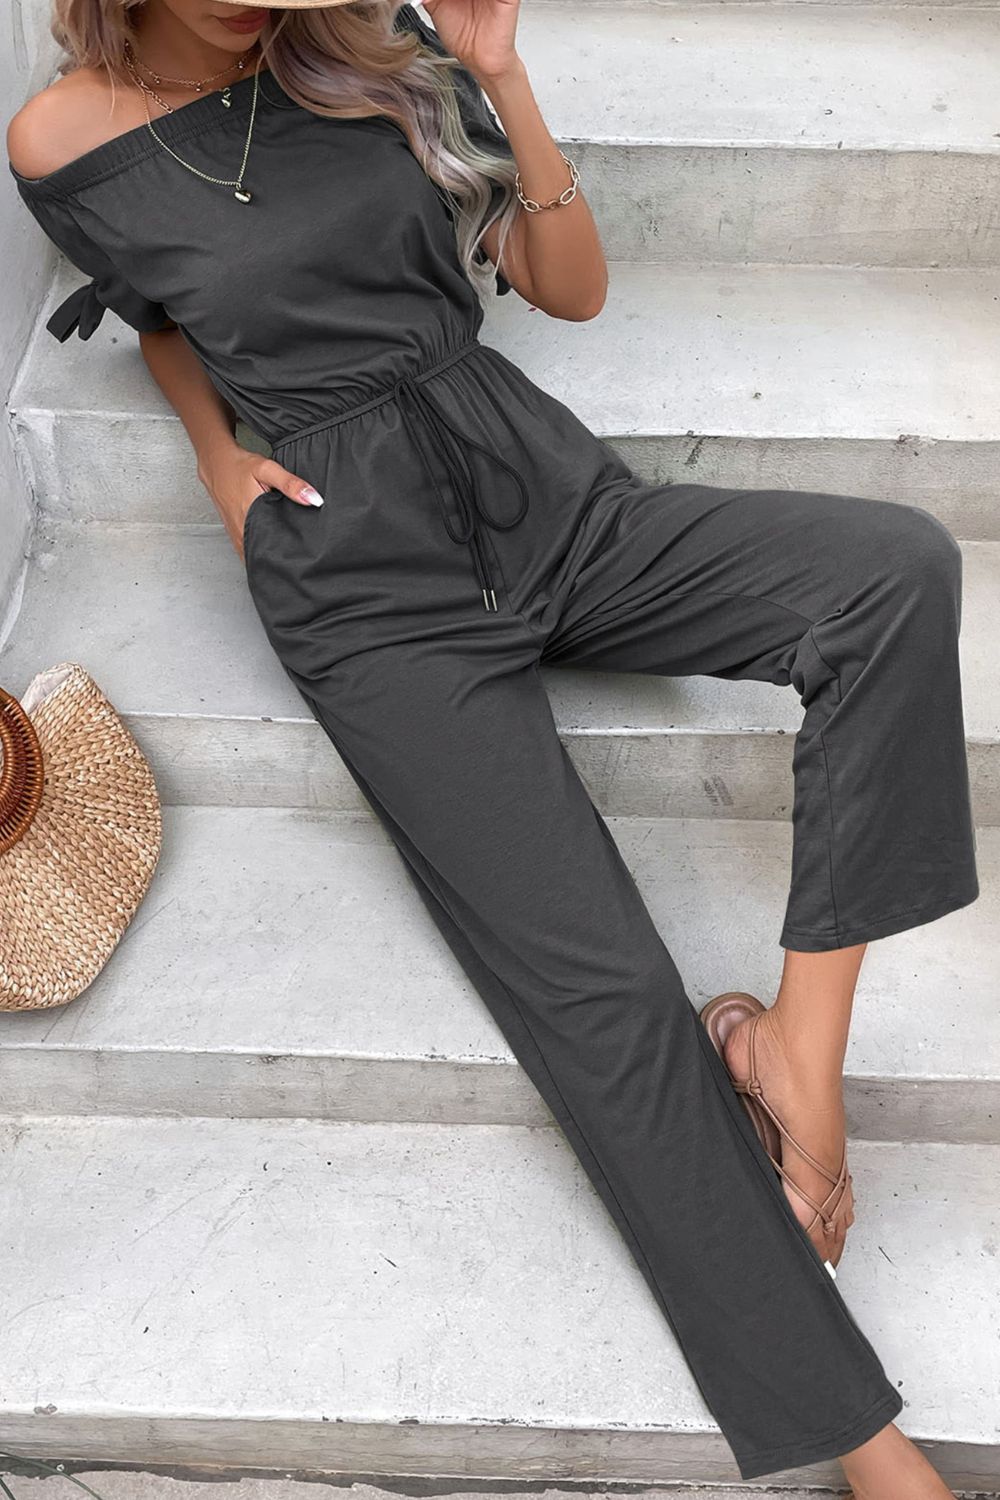 Off-Shoulder Tie Cuff Jumpsuit with Pockets - Shah S. Sahota